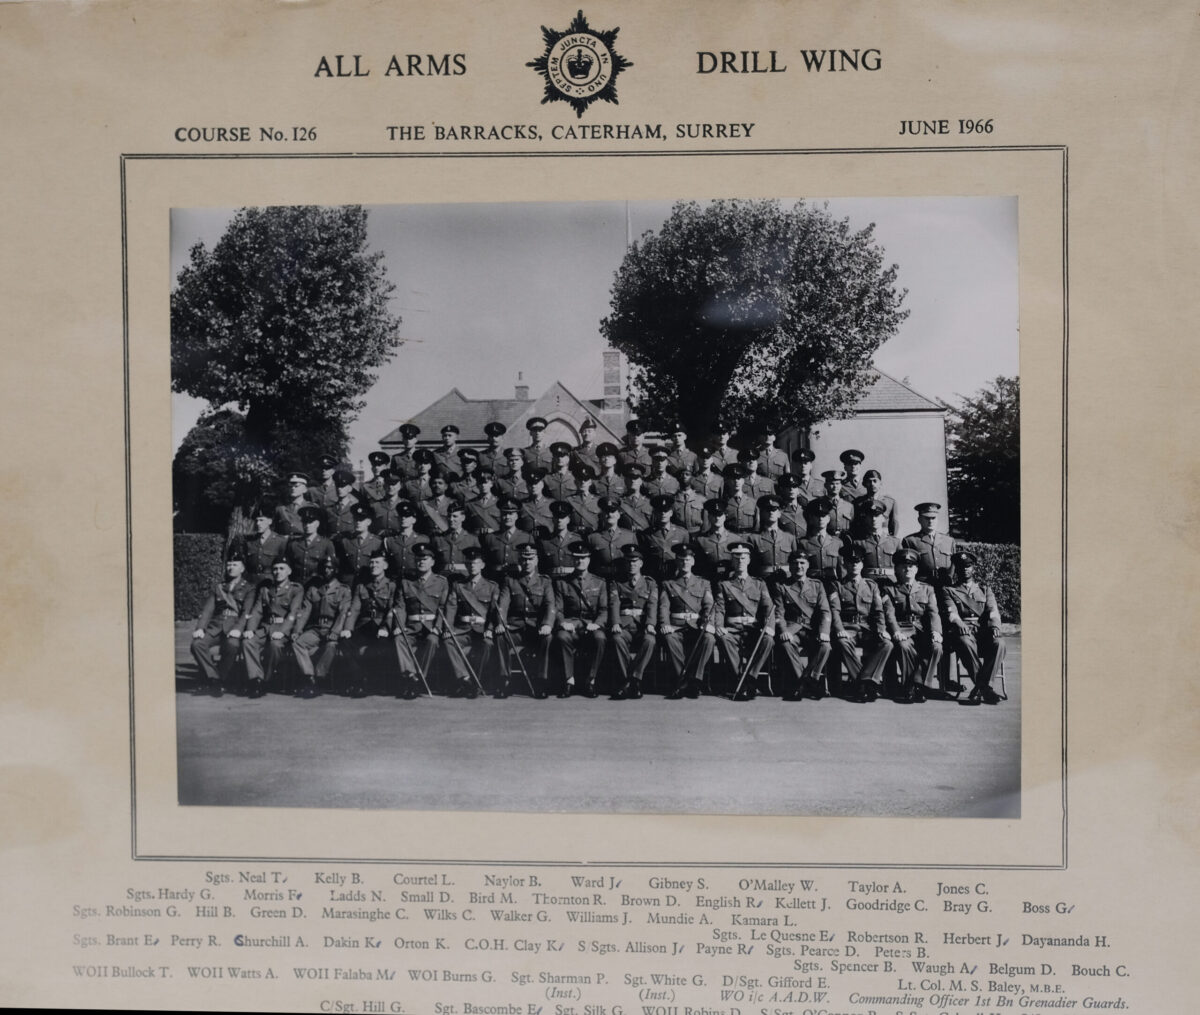 All Arms Drill Wing Course No.126 June 1966